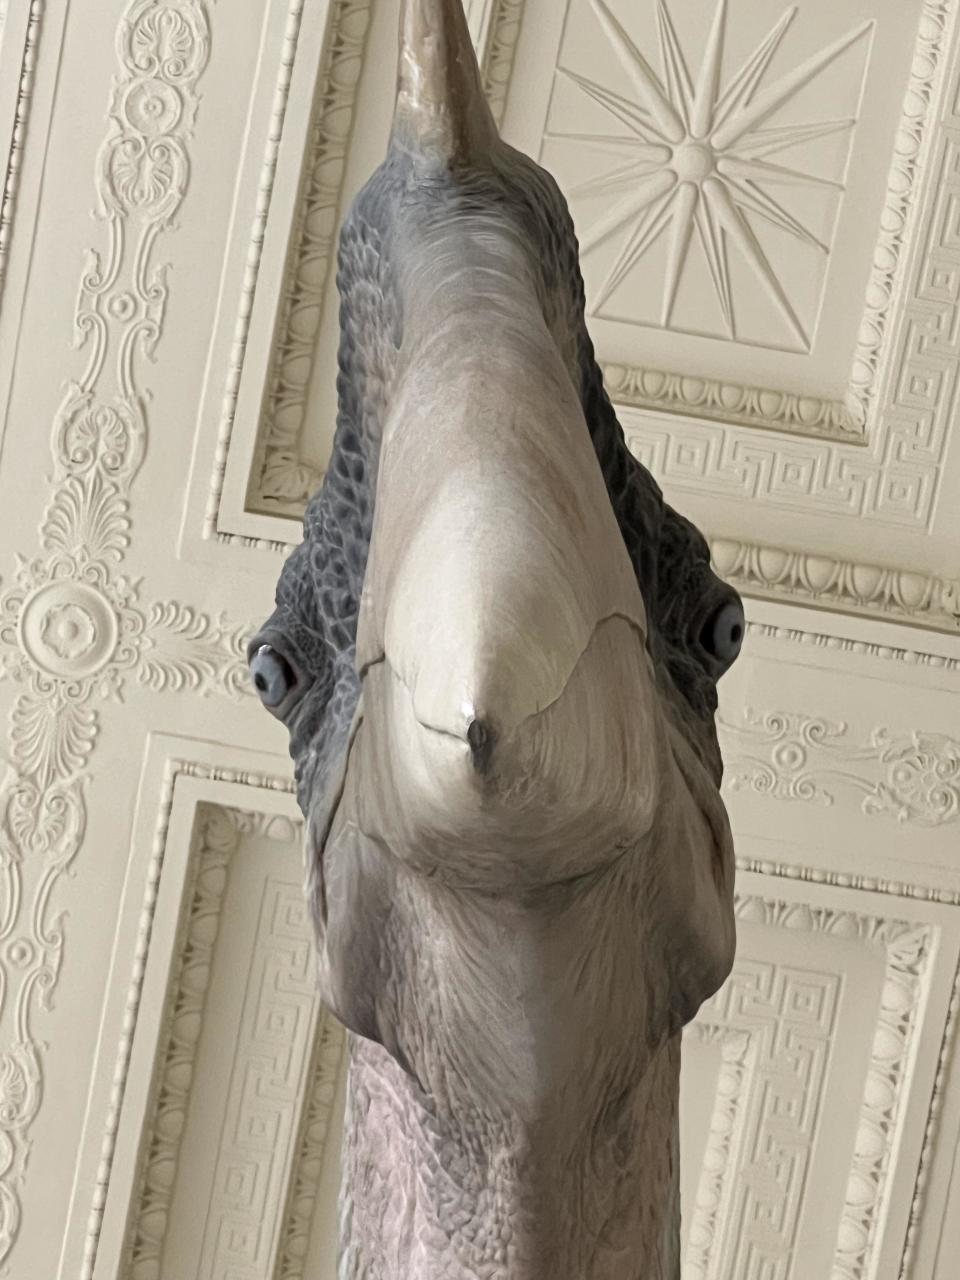 Close-up of a large bird sculpture with a detailed feather texture, set against an ornately decorated ceiling